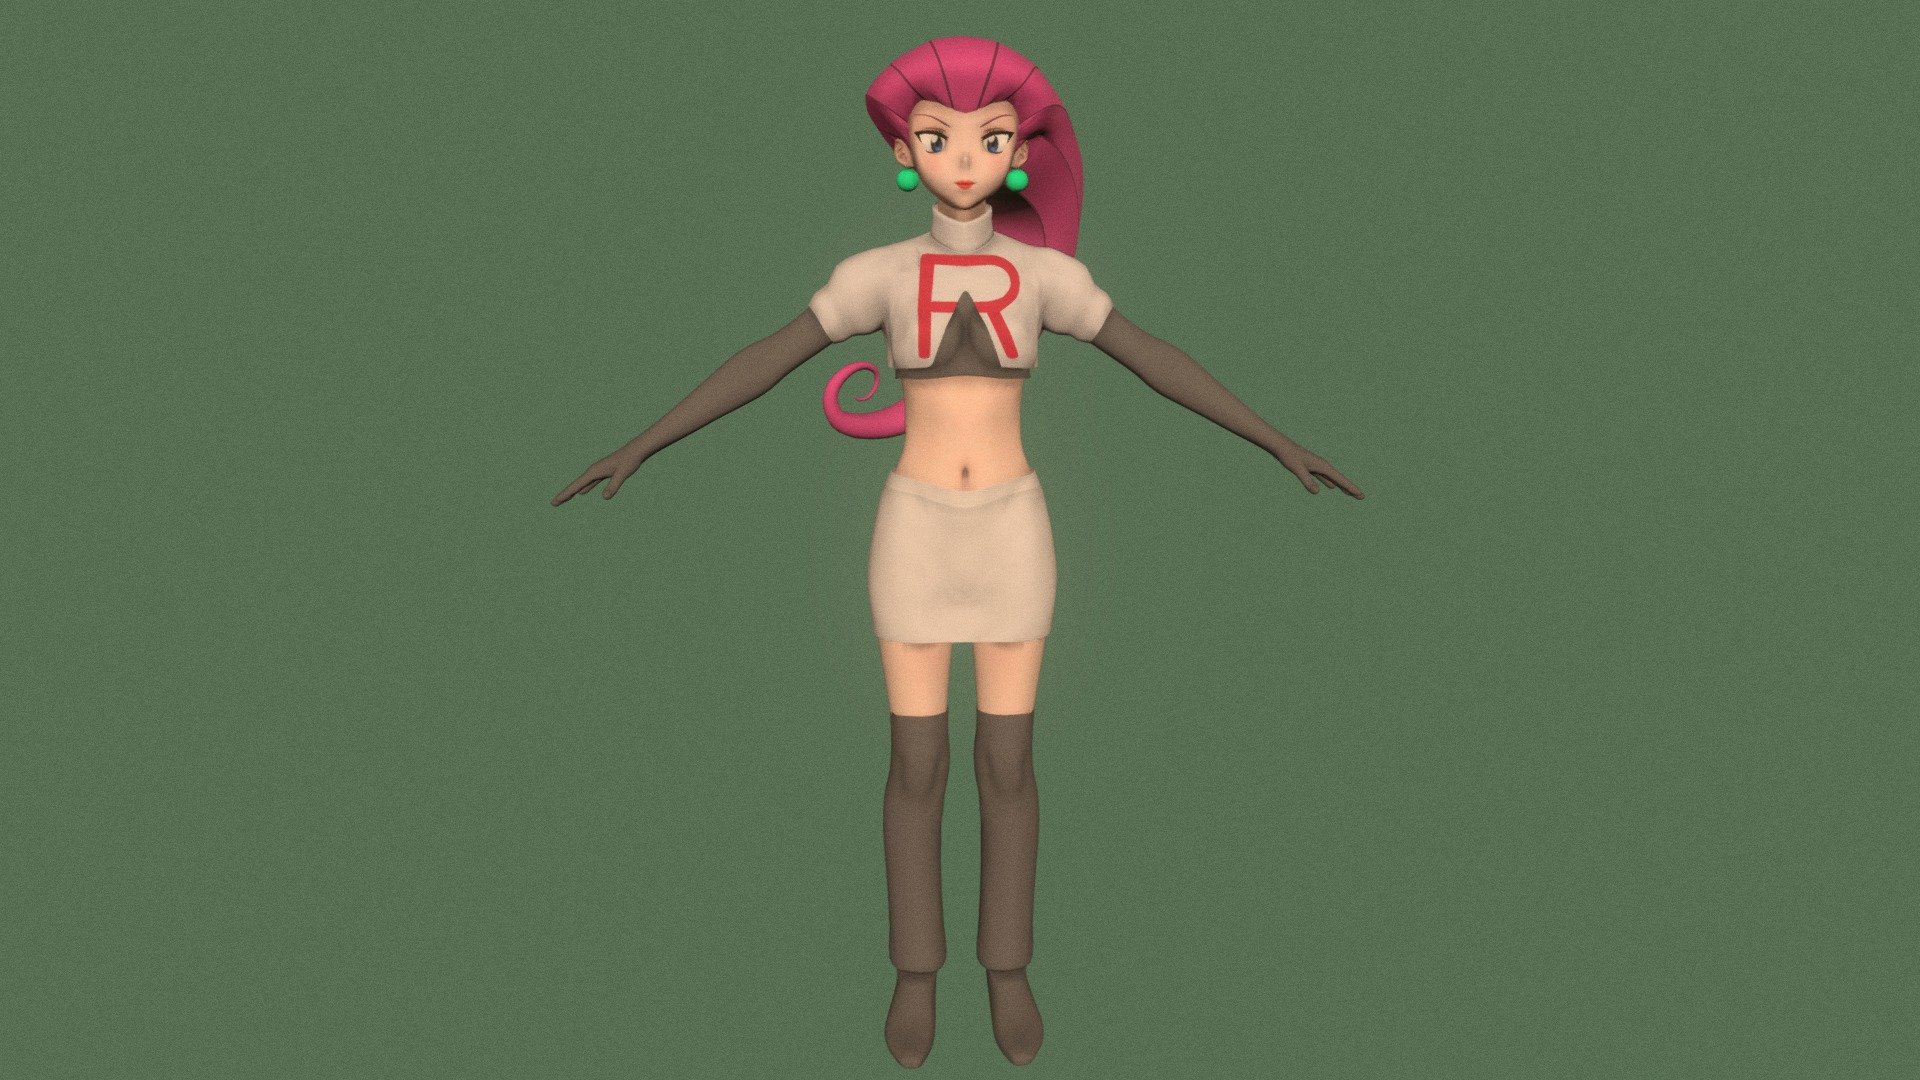 T-pose rigged model of anime girl Jessie (Pokemon).

Body and clothings are rigged and skinned by 3ds Max CAT system.

Eye direction and facial animation controlled by Morpher modifier / Shape Keys / Blendshape.

This product include .FBX (ver. 7200) and .MAX (ver. 2010) files.

3ds Max version is turbosmoothed to give a high quality render (as you can see here).

Original main body mesh have ~7.000 polys.

This 3D model may need some tweaking to adapt the rig system to games engine and other platforms.

I support convert model to various file formats (the rig data will be lost in this process): 3DS; AI; ASE; DAE; DWF; DWG; DXF; FLT; HTR; IGS; M3G; MQO; OBJ; SAT; STL; W3D; WRL; X.

You can buy all of my models in one pack to save cost: https://sketchfab.com/3d-models/all-of-my-anime-girls-c5a56156994e4193b9e8fa21a3b8360b

And I can make commission models.

If you have any questions, please leave a comment or contact me via my email 3d.eden.project@gmail.com 3d model